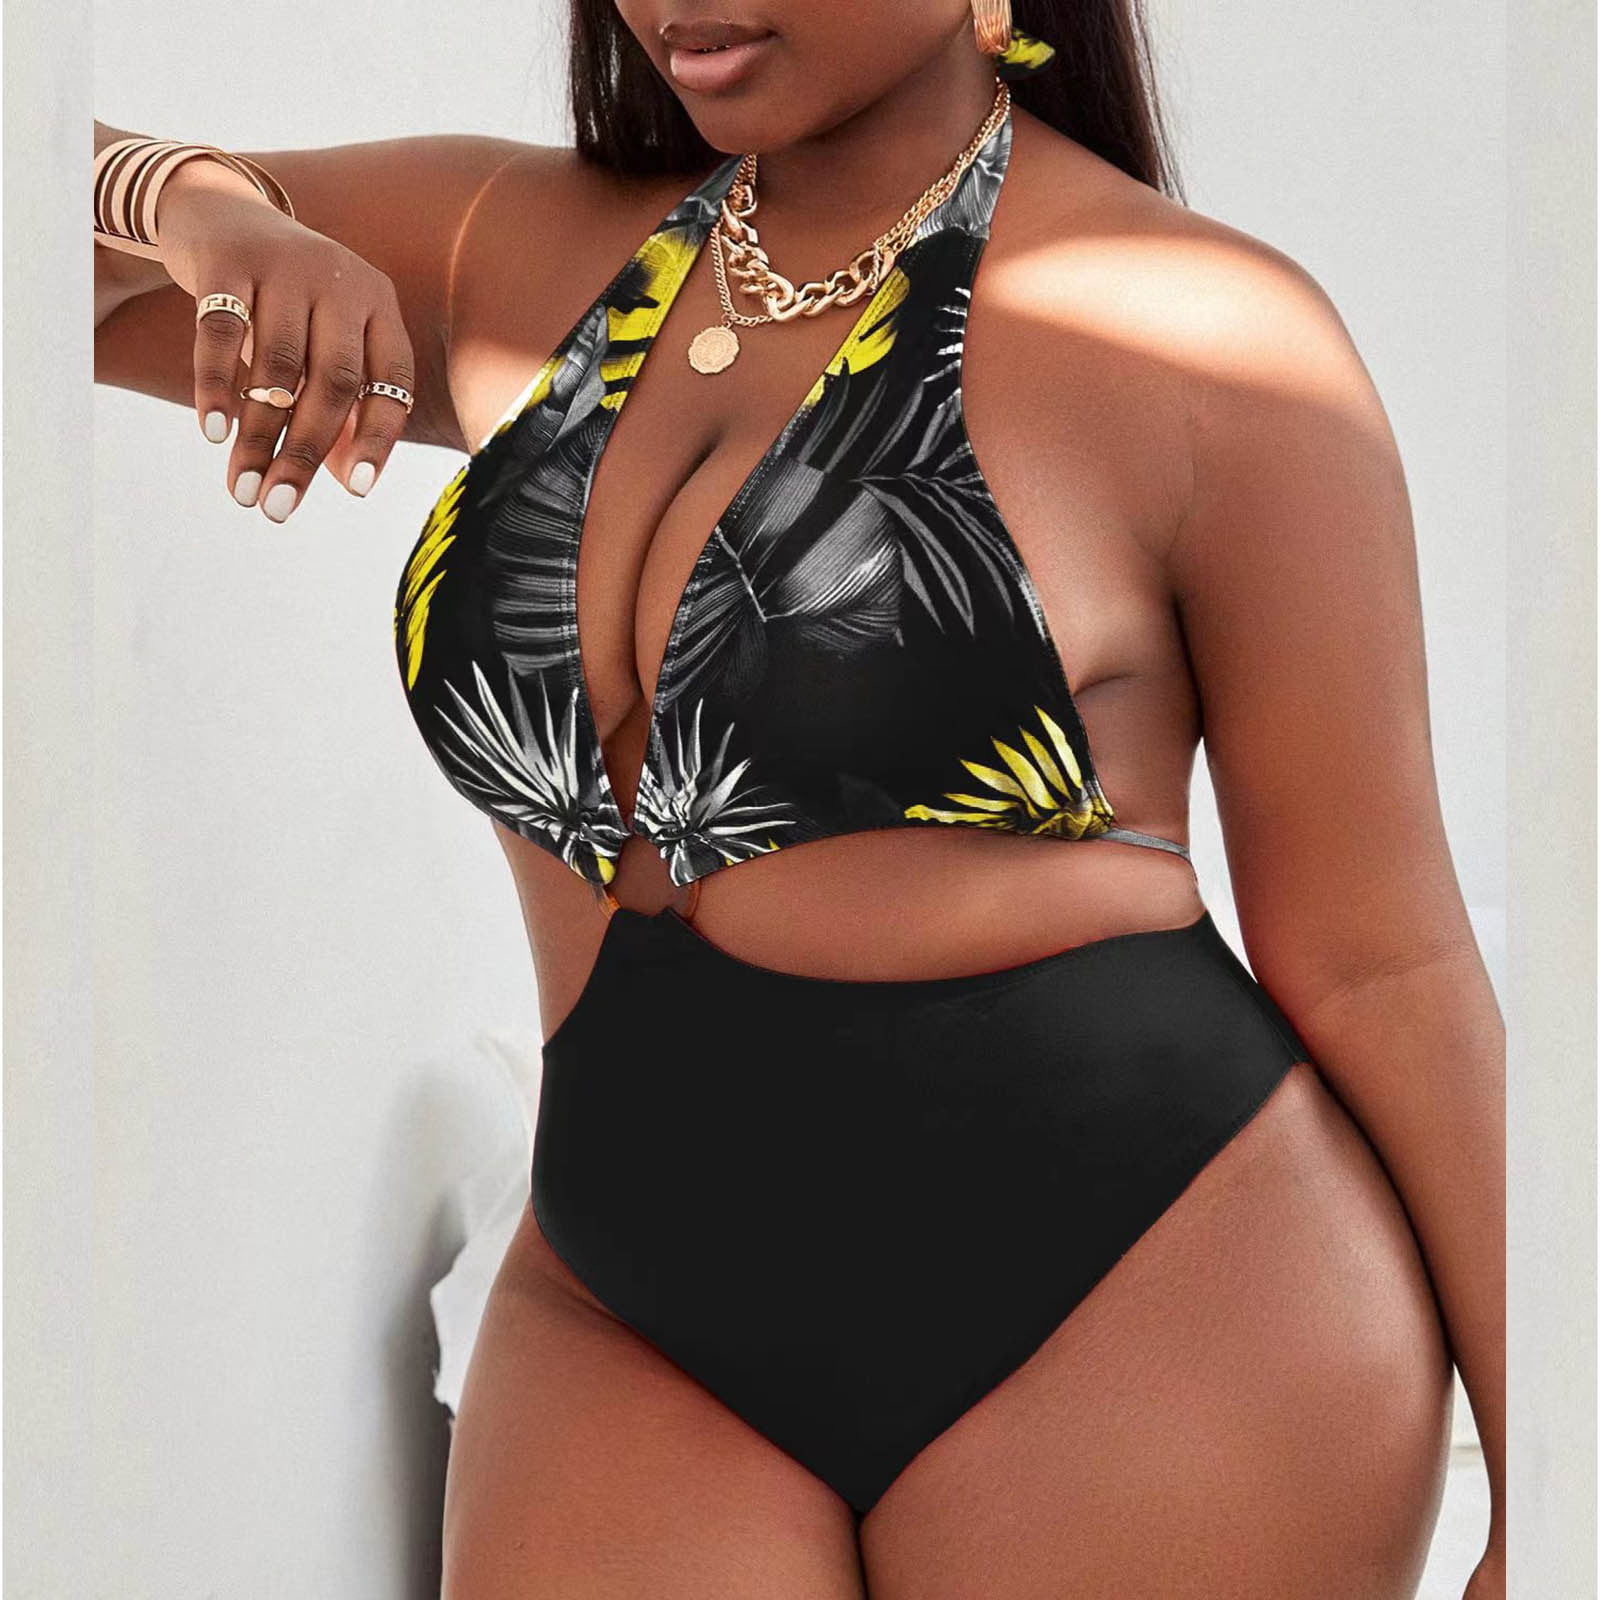 Lopecy-Sta Women's Printed Sleeveless Sexy Siamese Tight Swimsuit Swimsuit  Women Sales Clearance Swimsuits for Curvy Women Black 